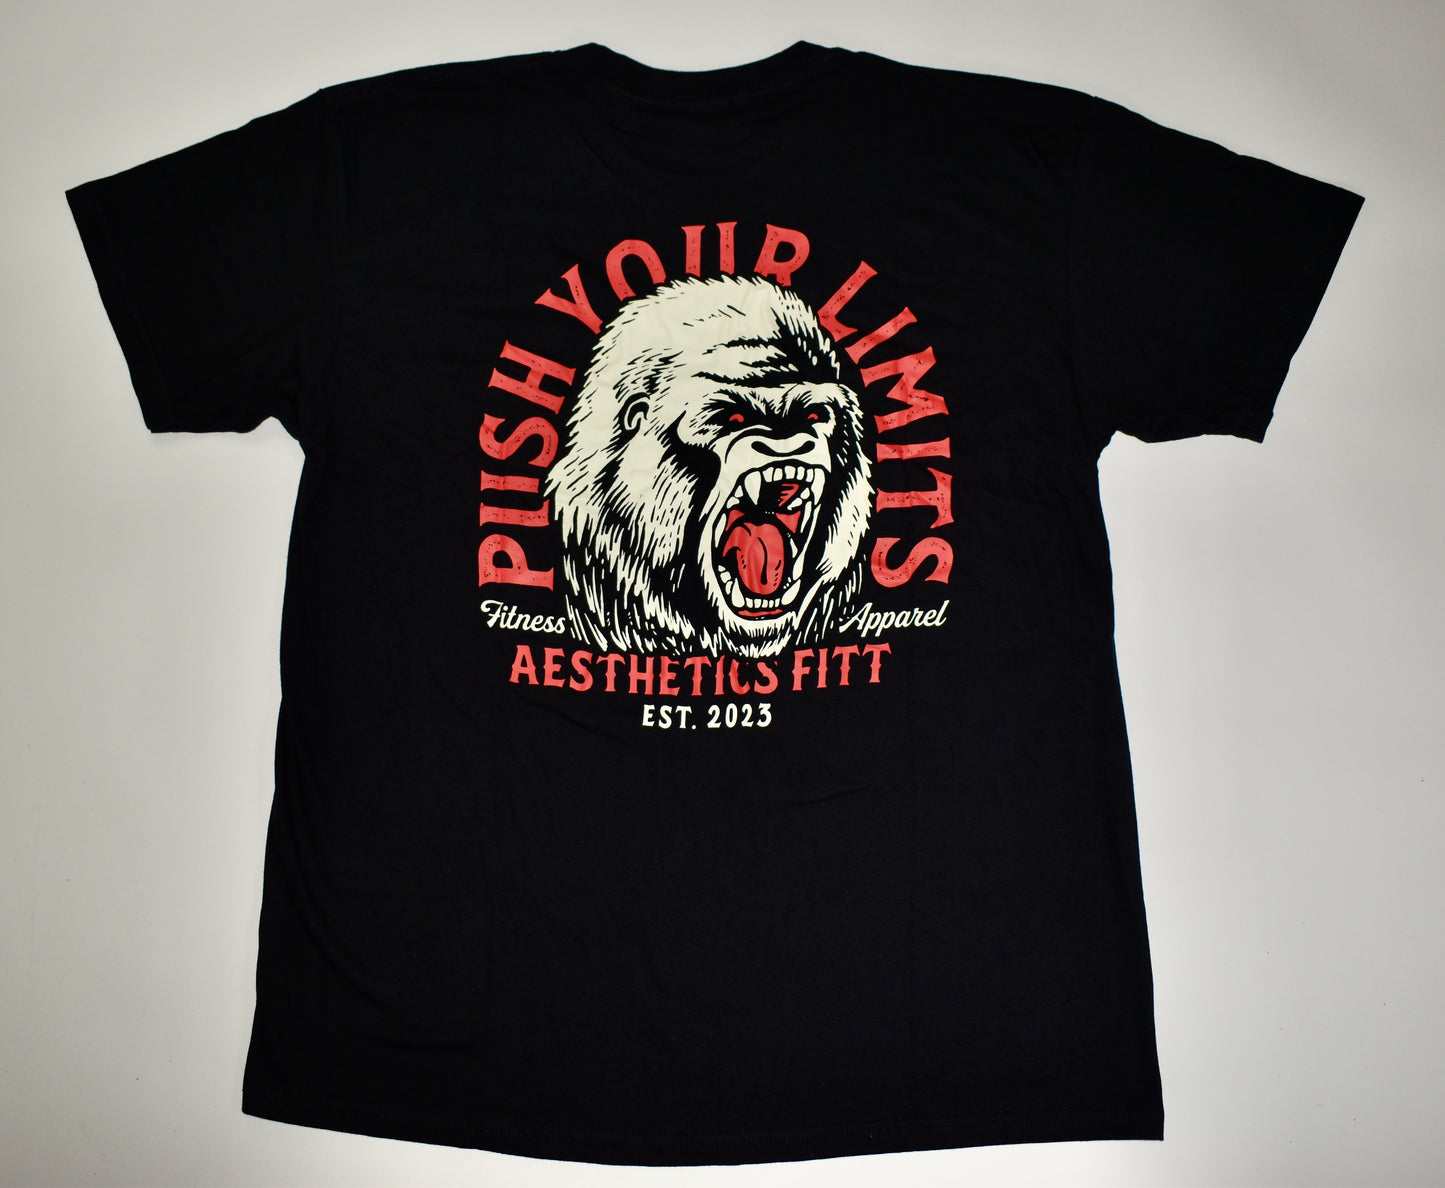 PUSH YOUR LIMITS OVERSIZED TEE - BLACK